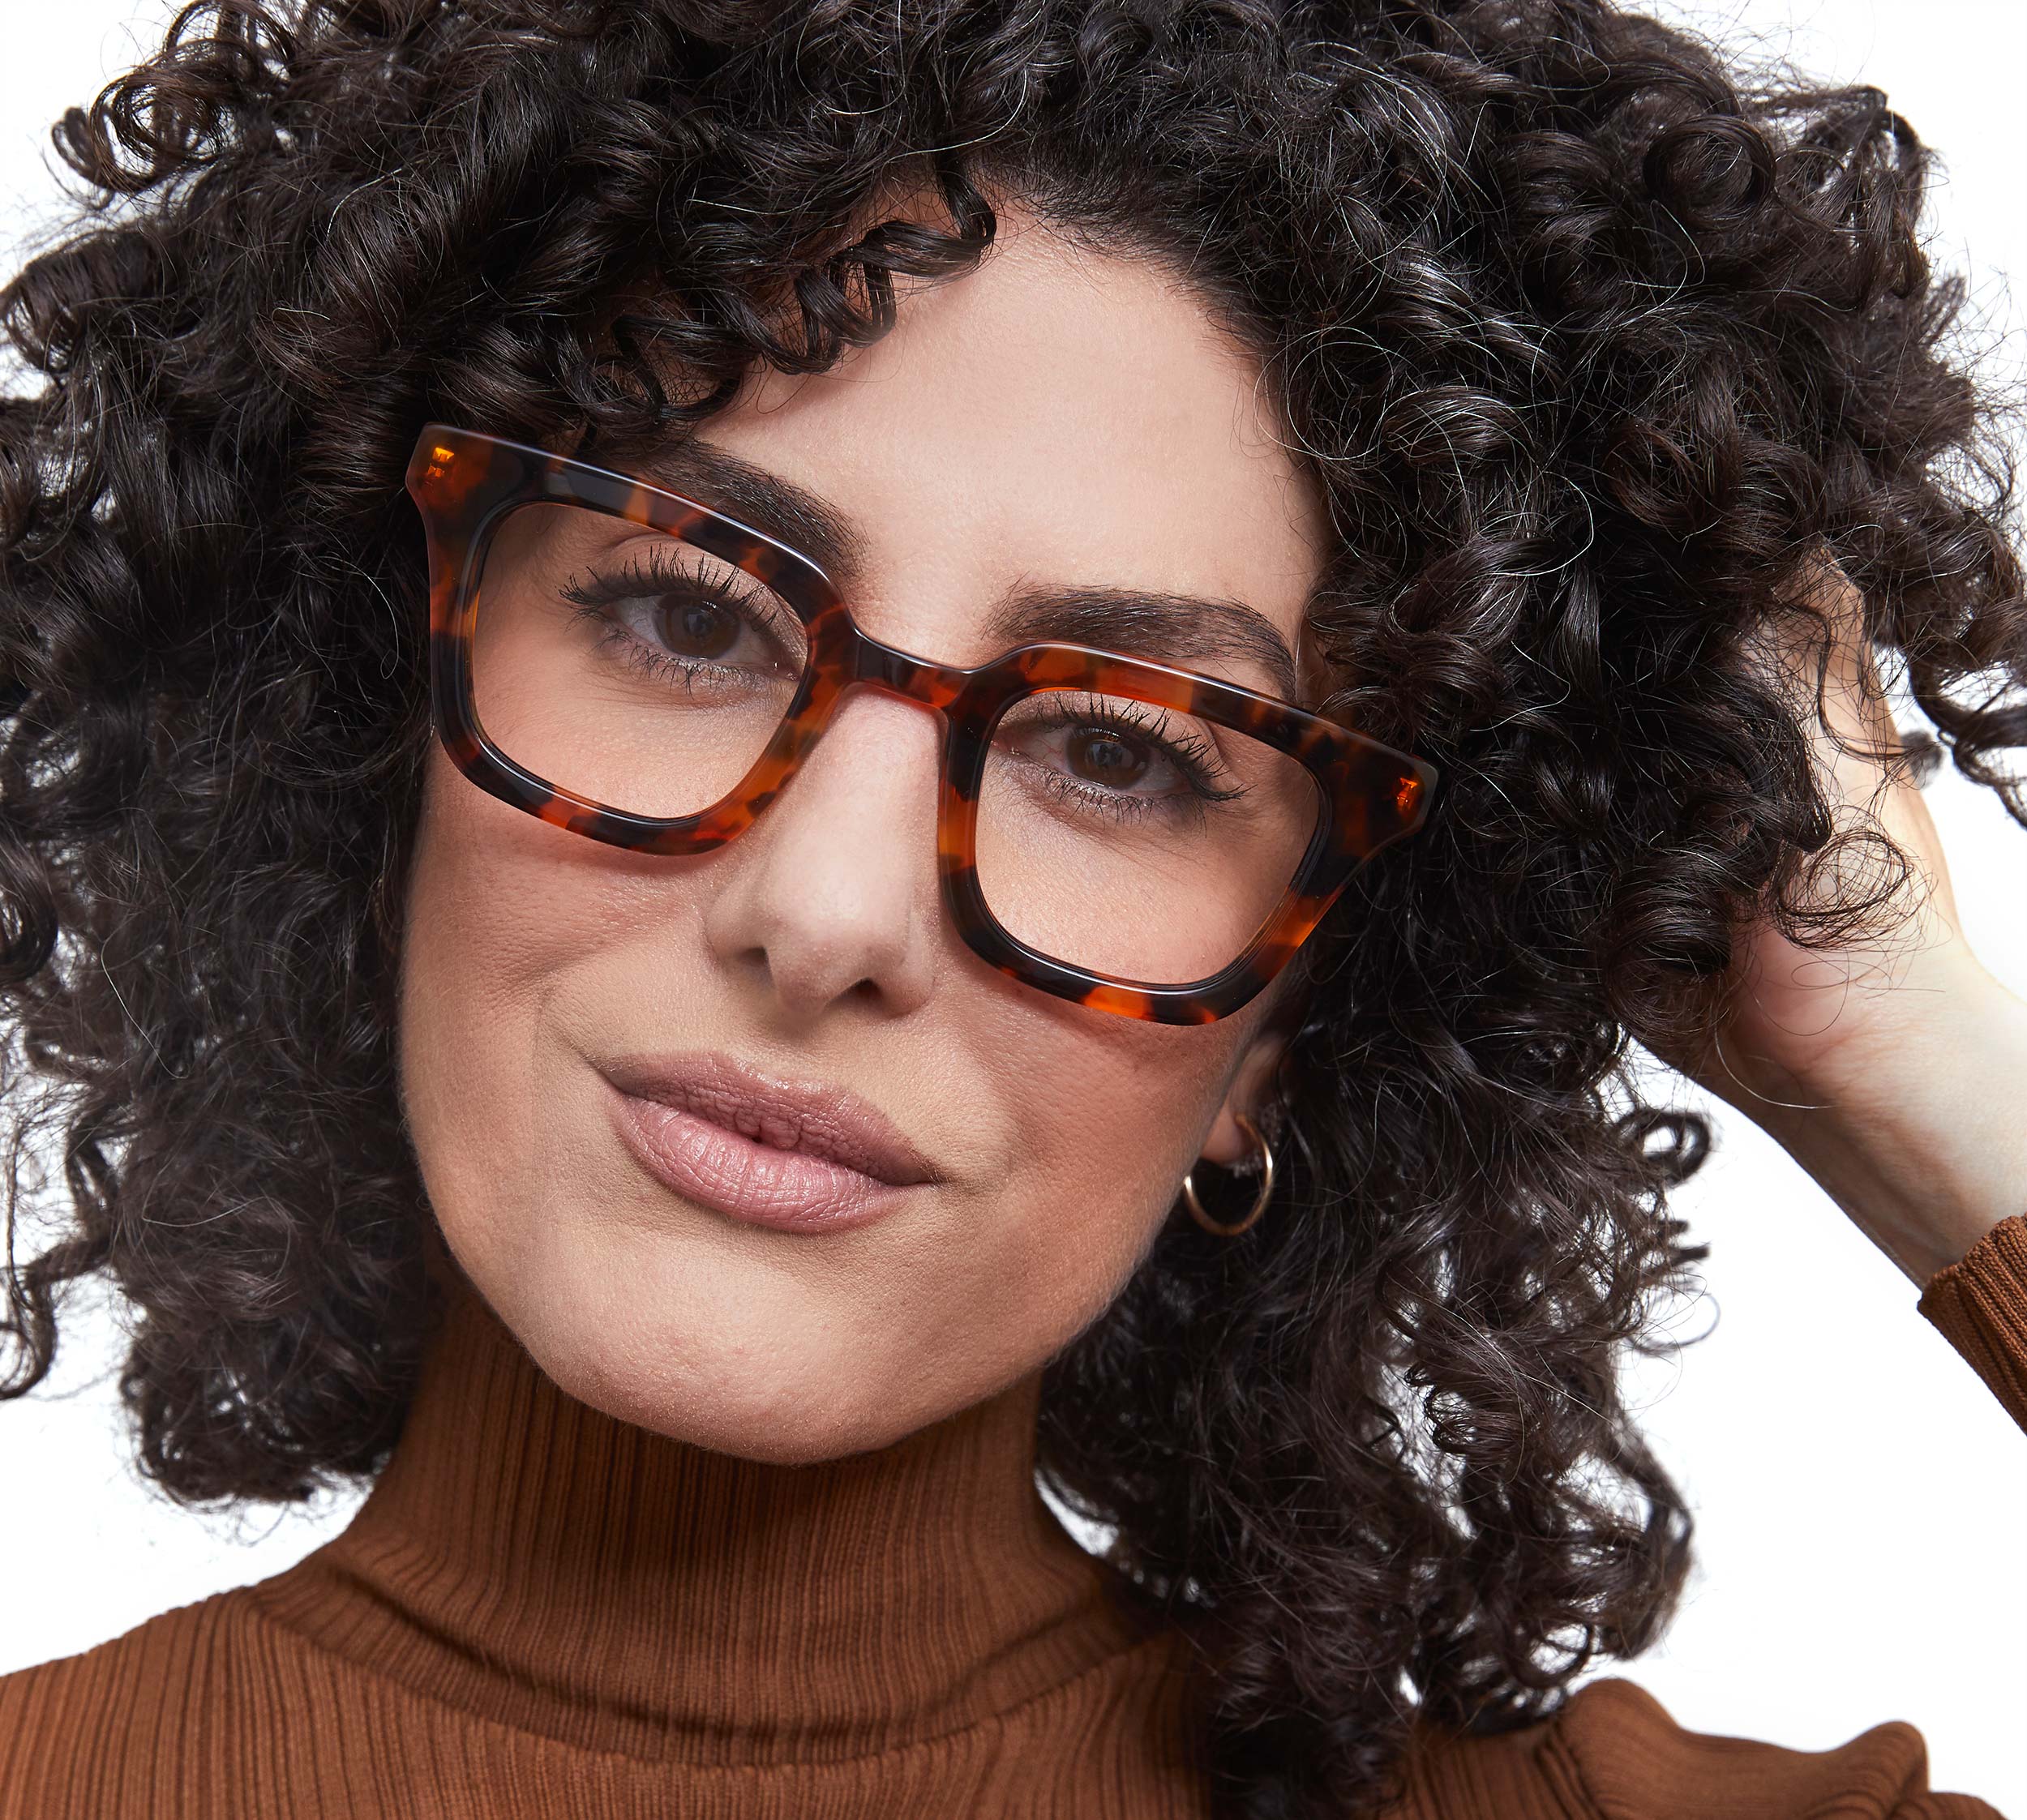 Photo of a man or woman wearing Ysée Black Reading Glasses by French Kiwis